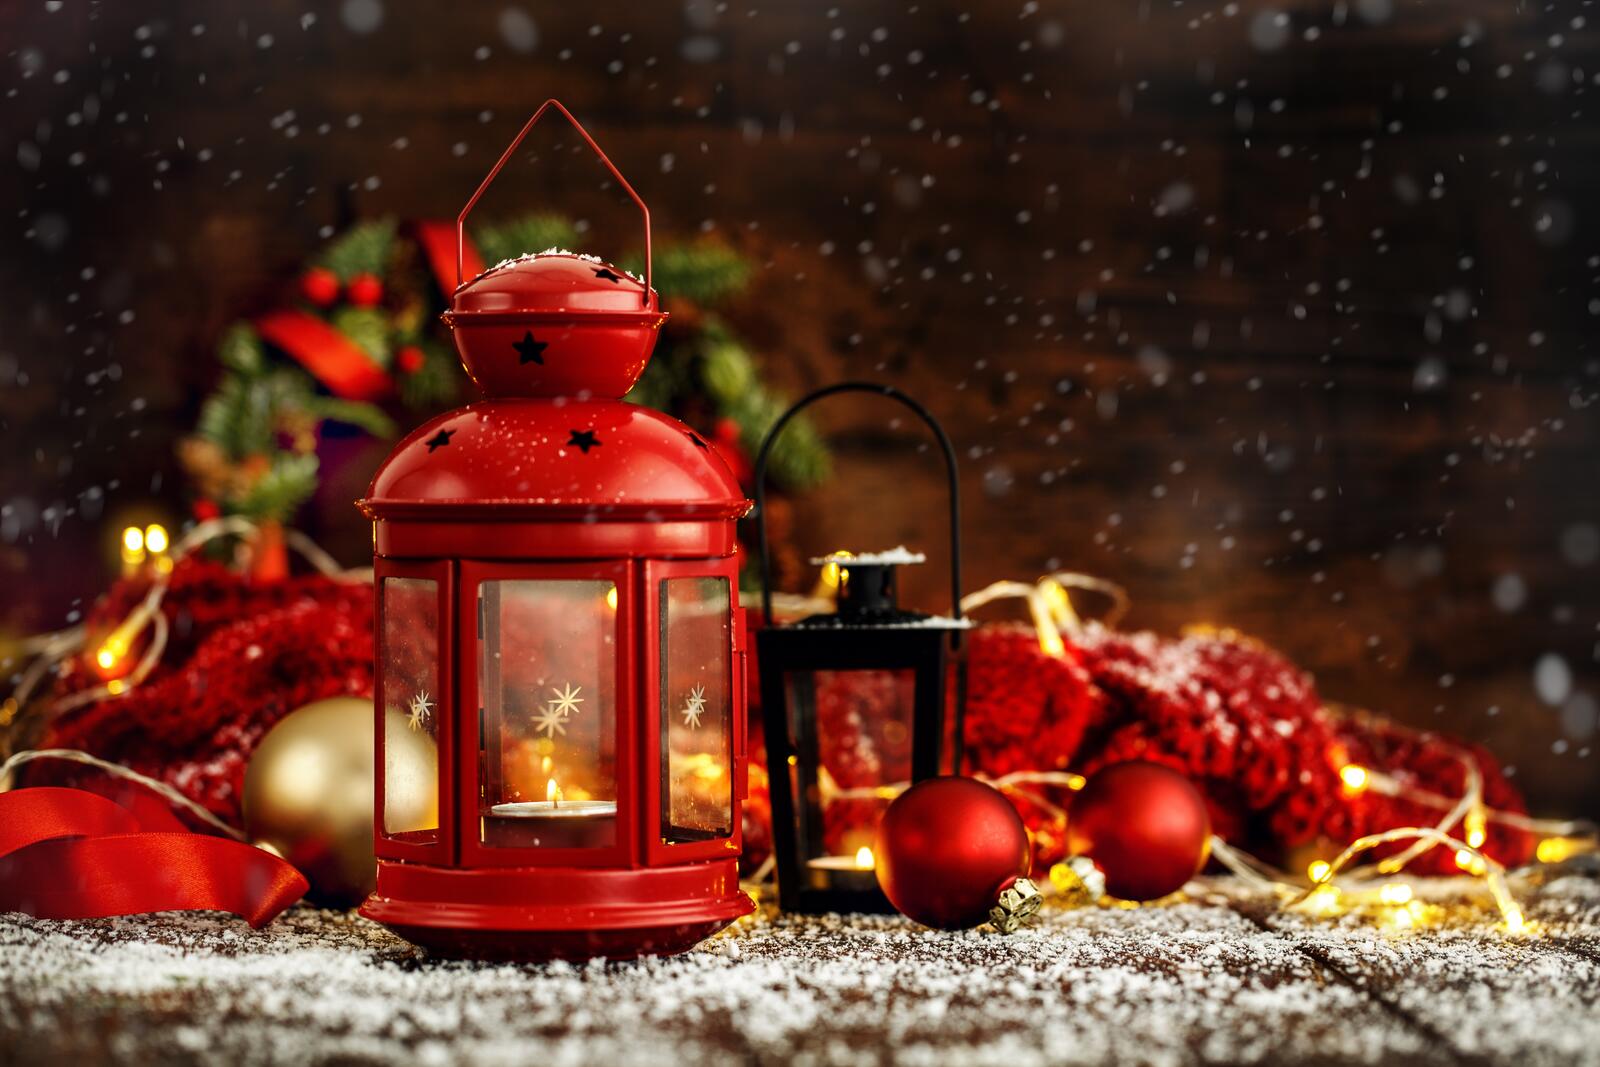 Wallpapers red lantern Christmas background on the desktop